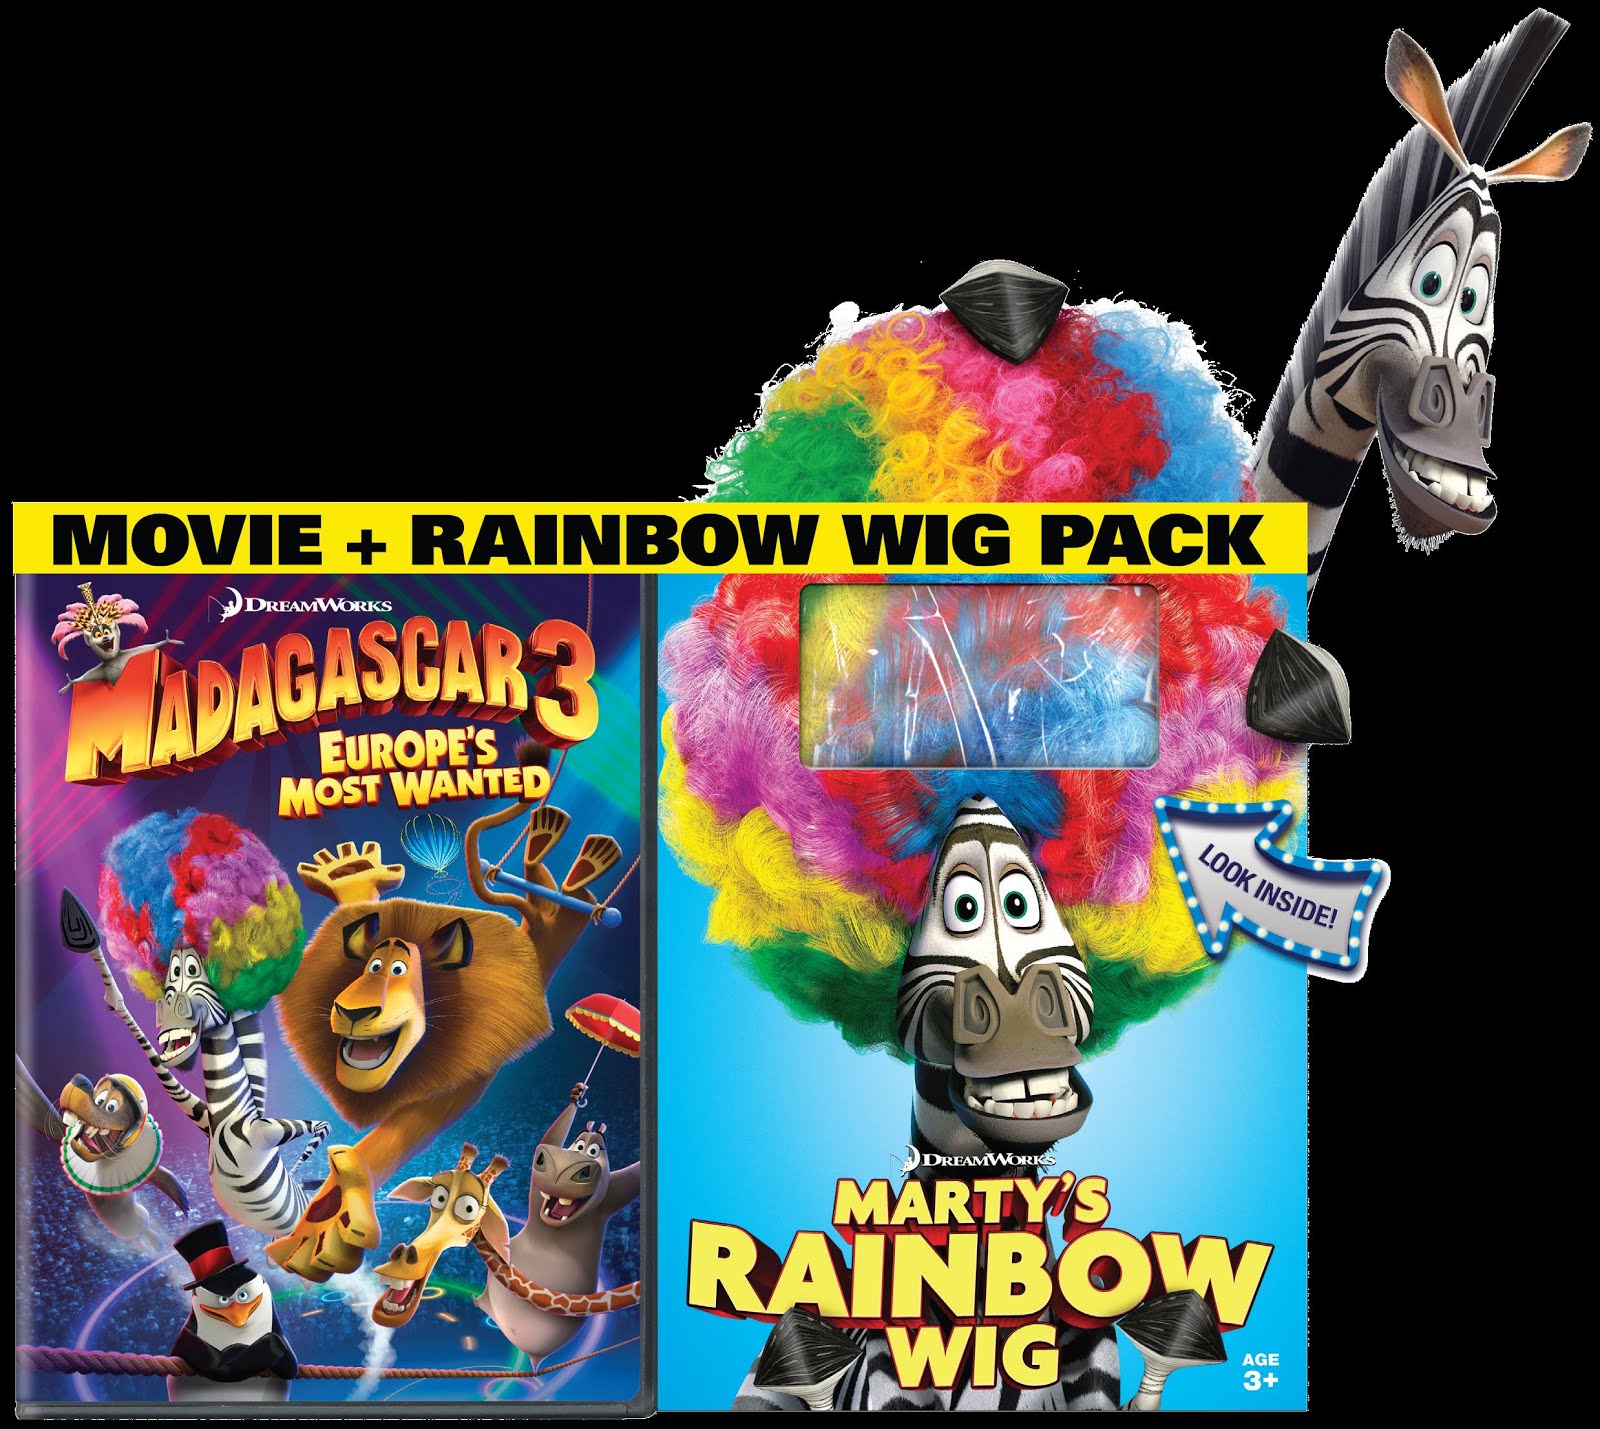 Madagascar 3: Europe's Most Wanted – Event & DVD Giveaway